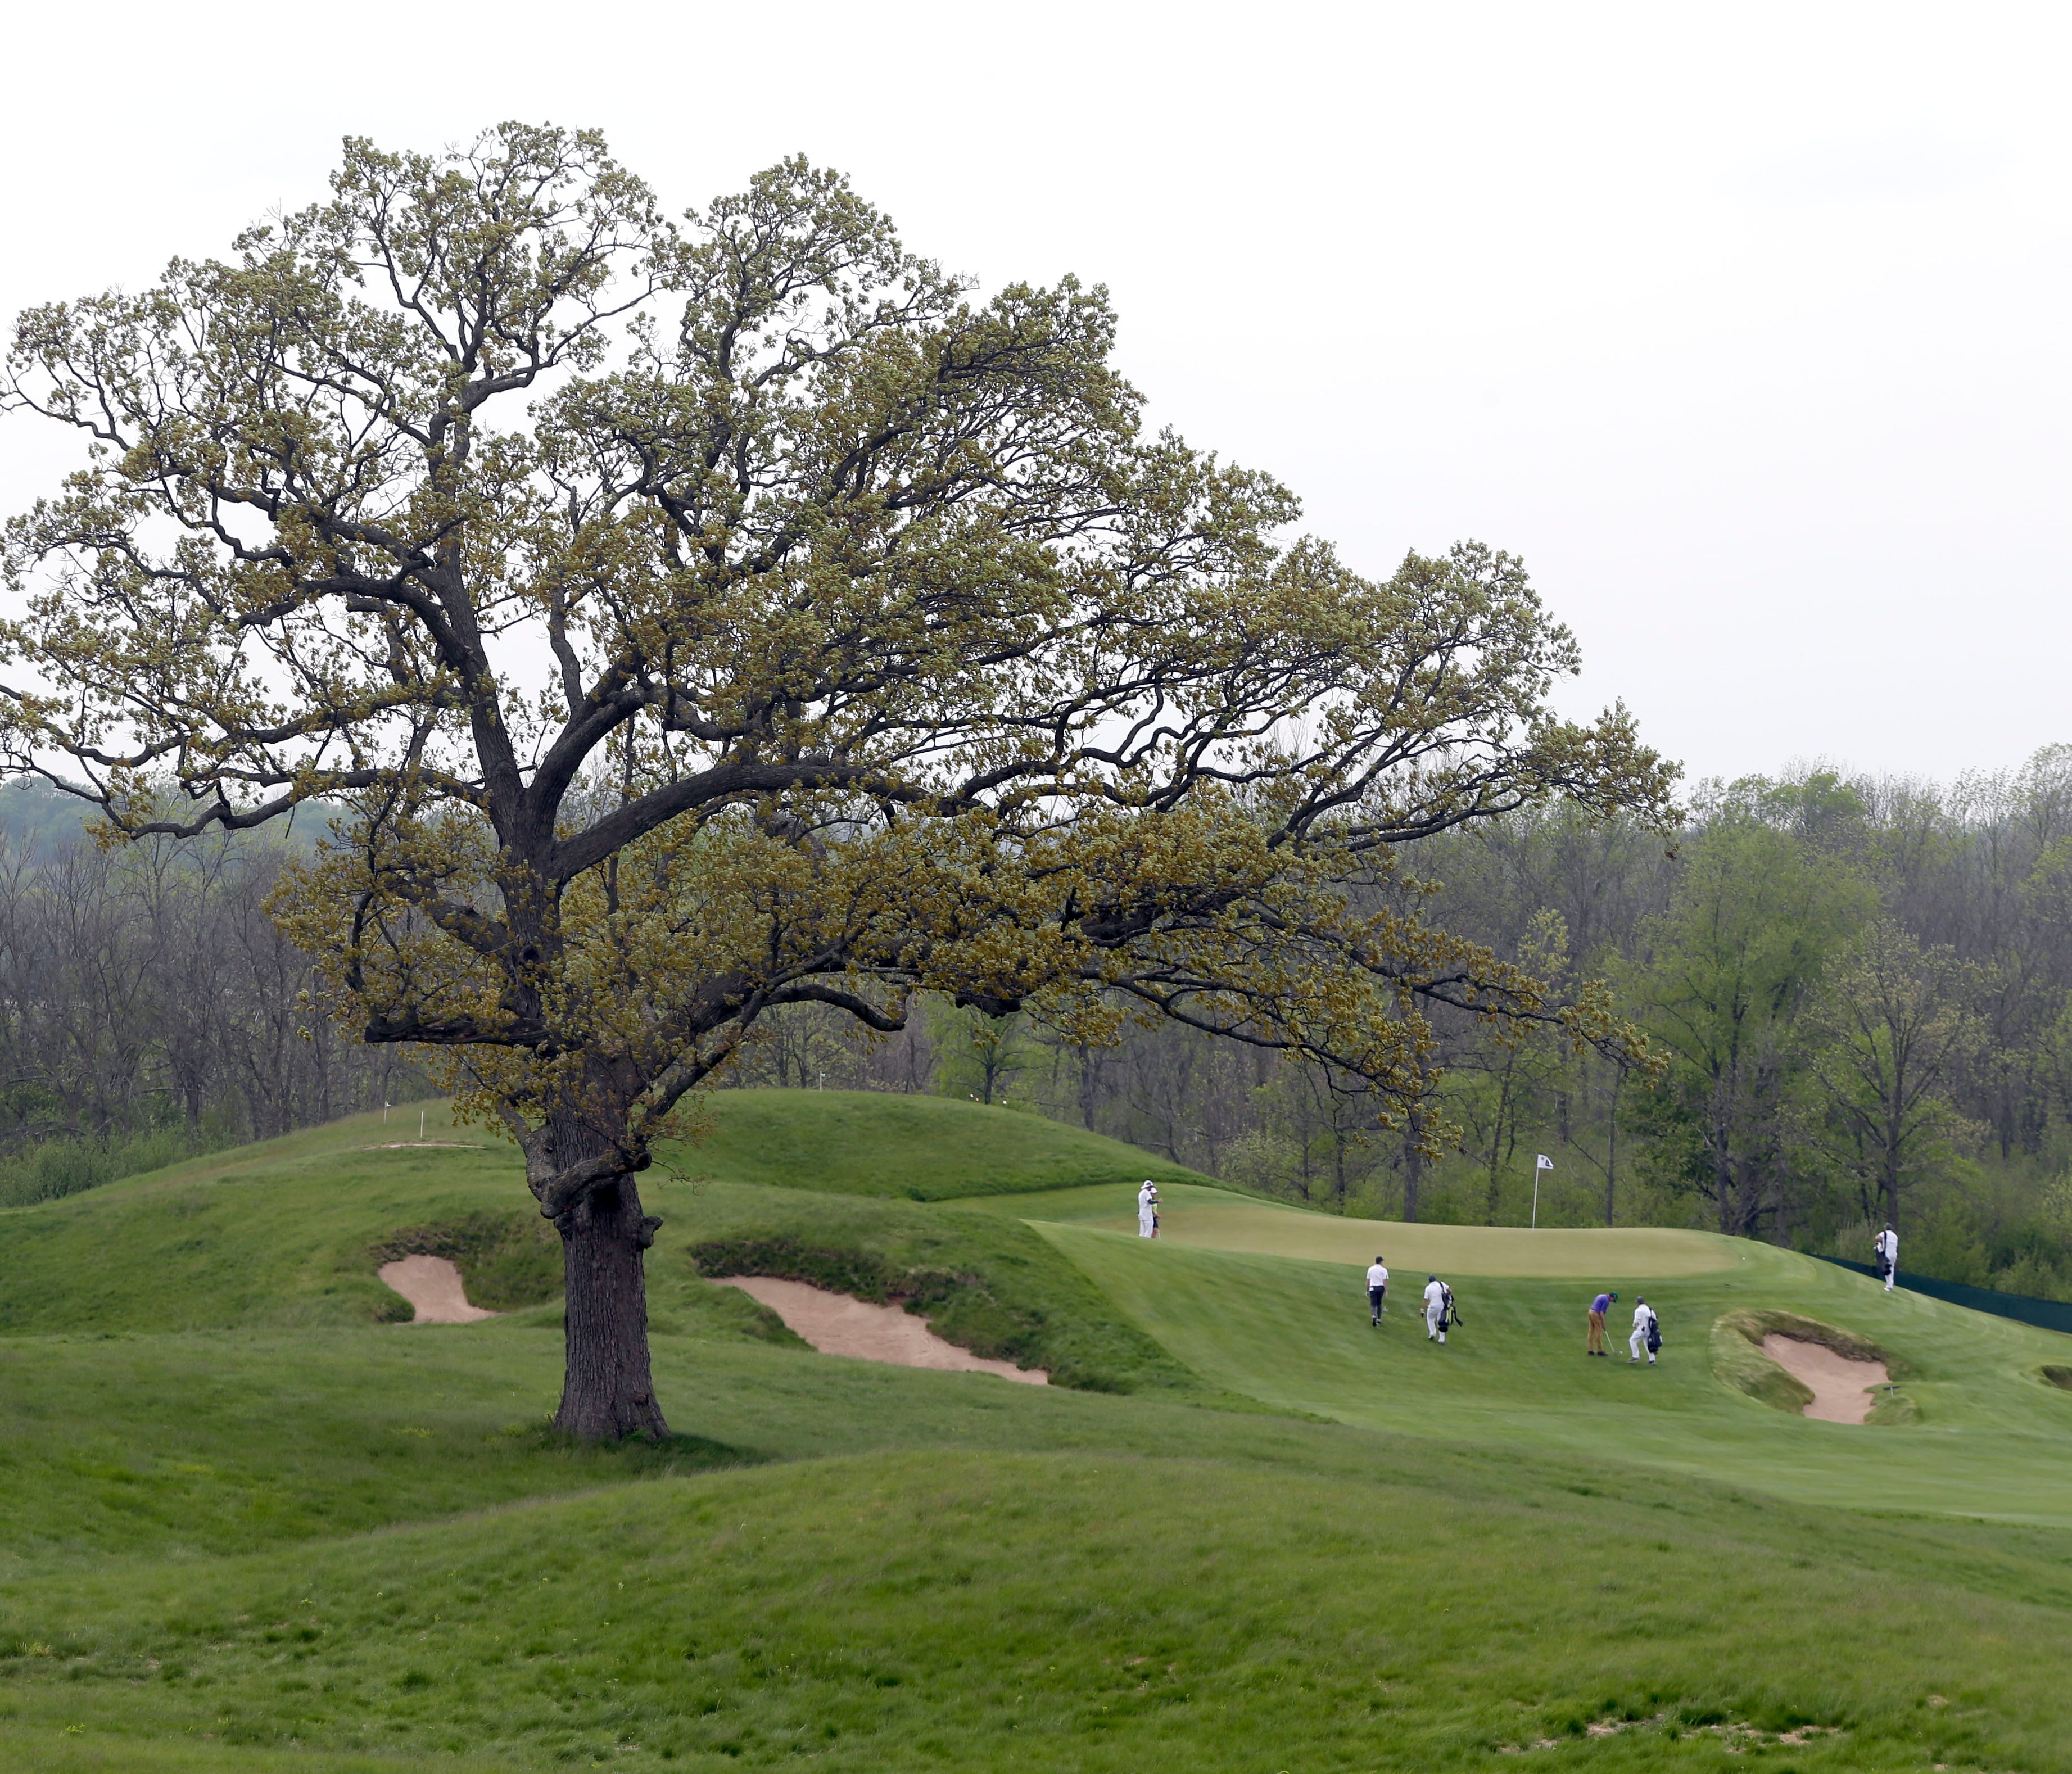 A lone oak tree stands between the 15th and 16 holes during the U.S. Open golf tournament media day at Erin Hills, Wis., May 17, 2017. The man who first imagined the grassy Wisconsin cattle farm as a potential piece of the U.S. Open's hallowed histor